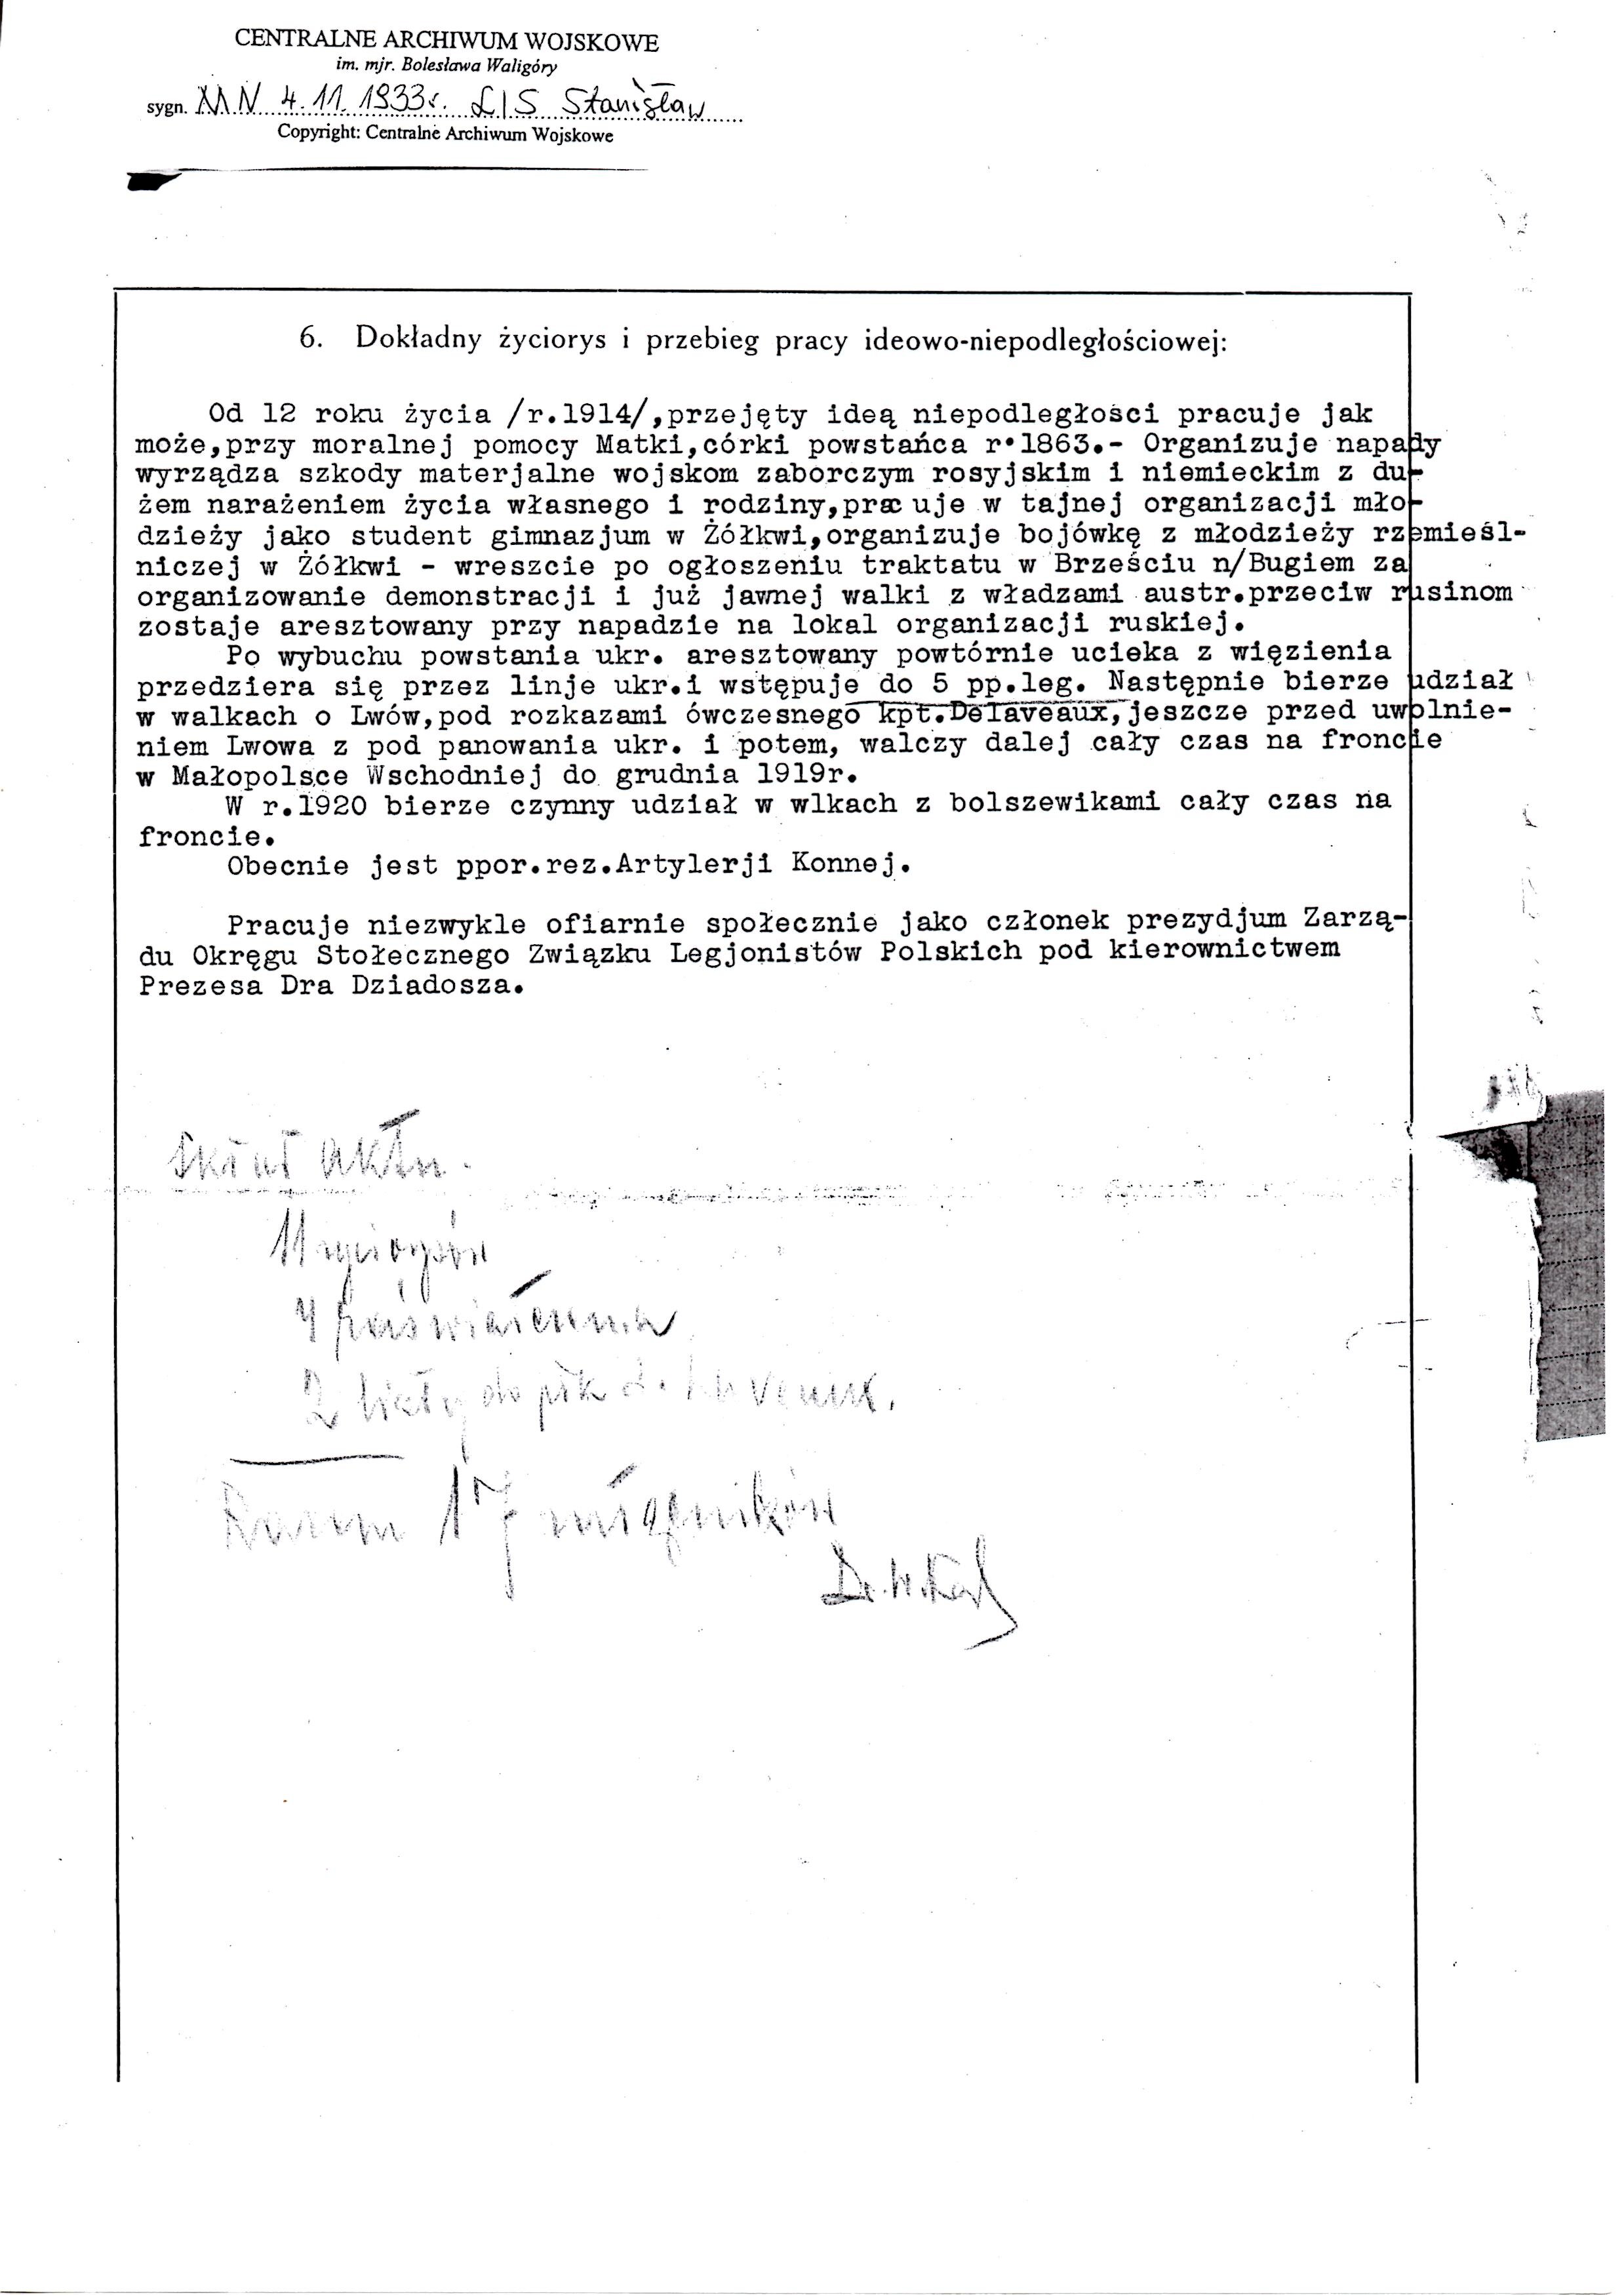 Stanislaw Lis Medal of Independance Document 4 page 2.jpg